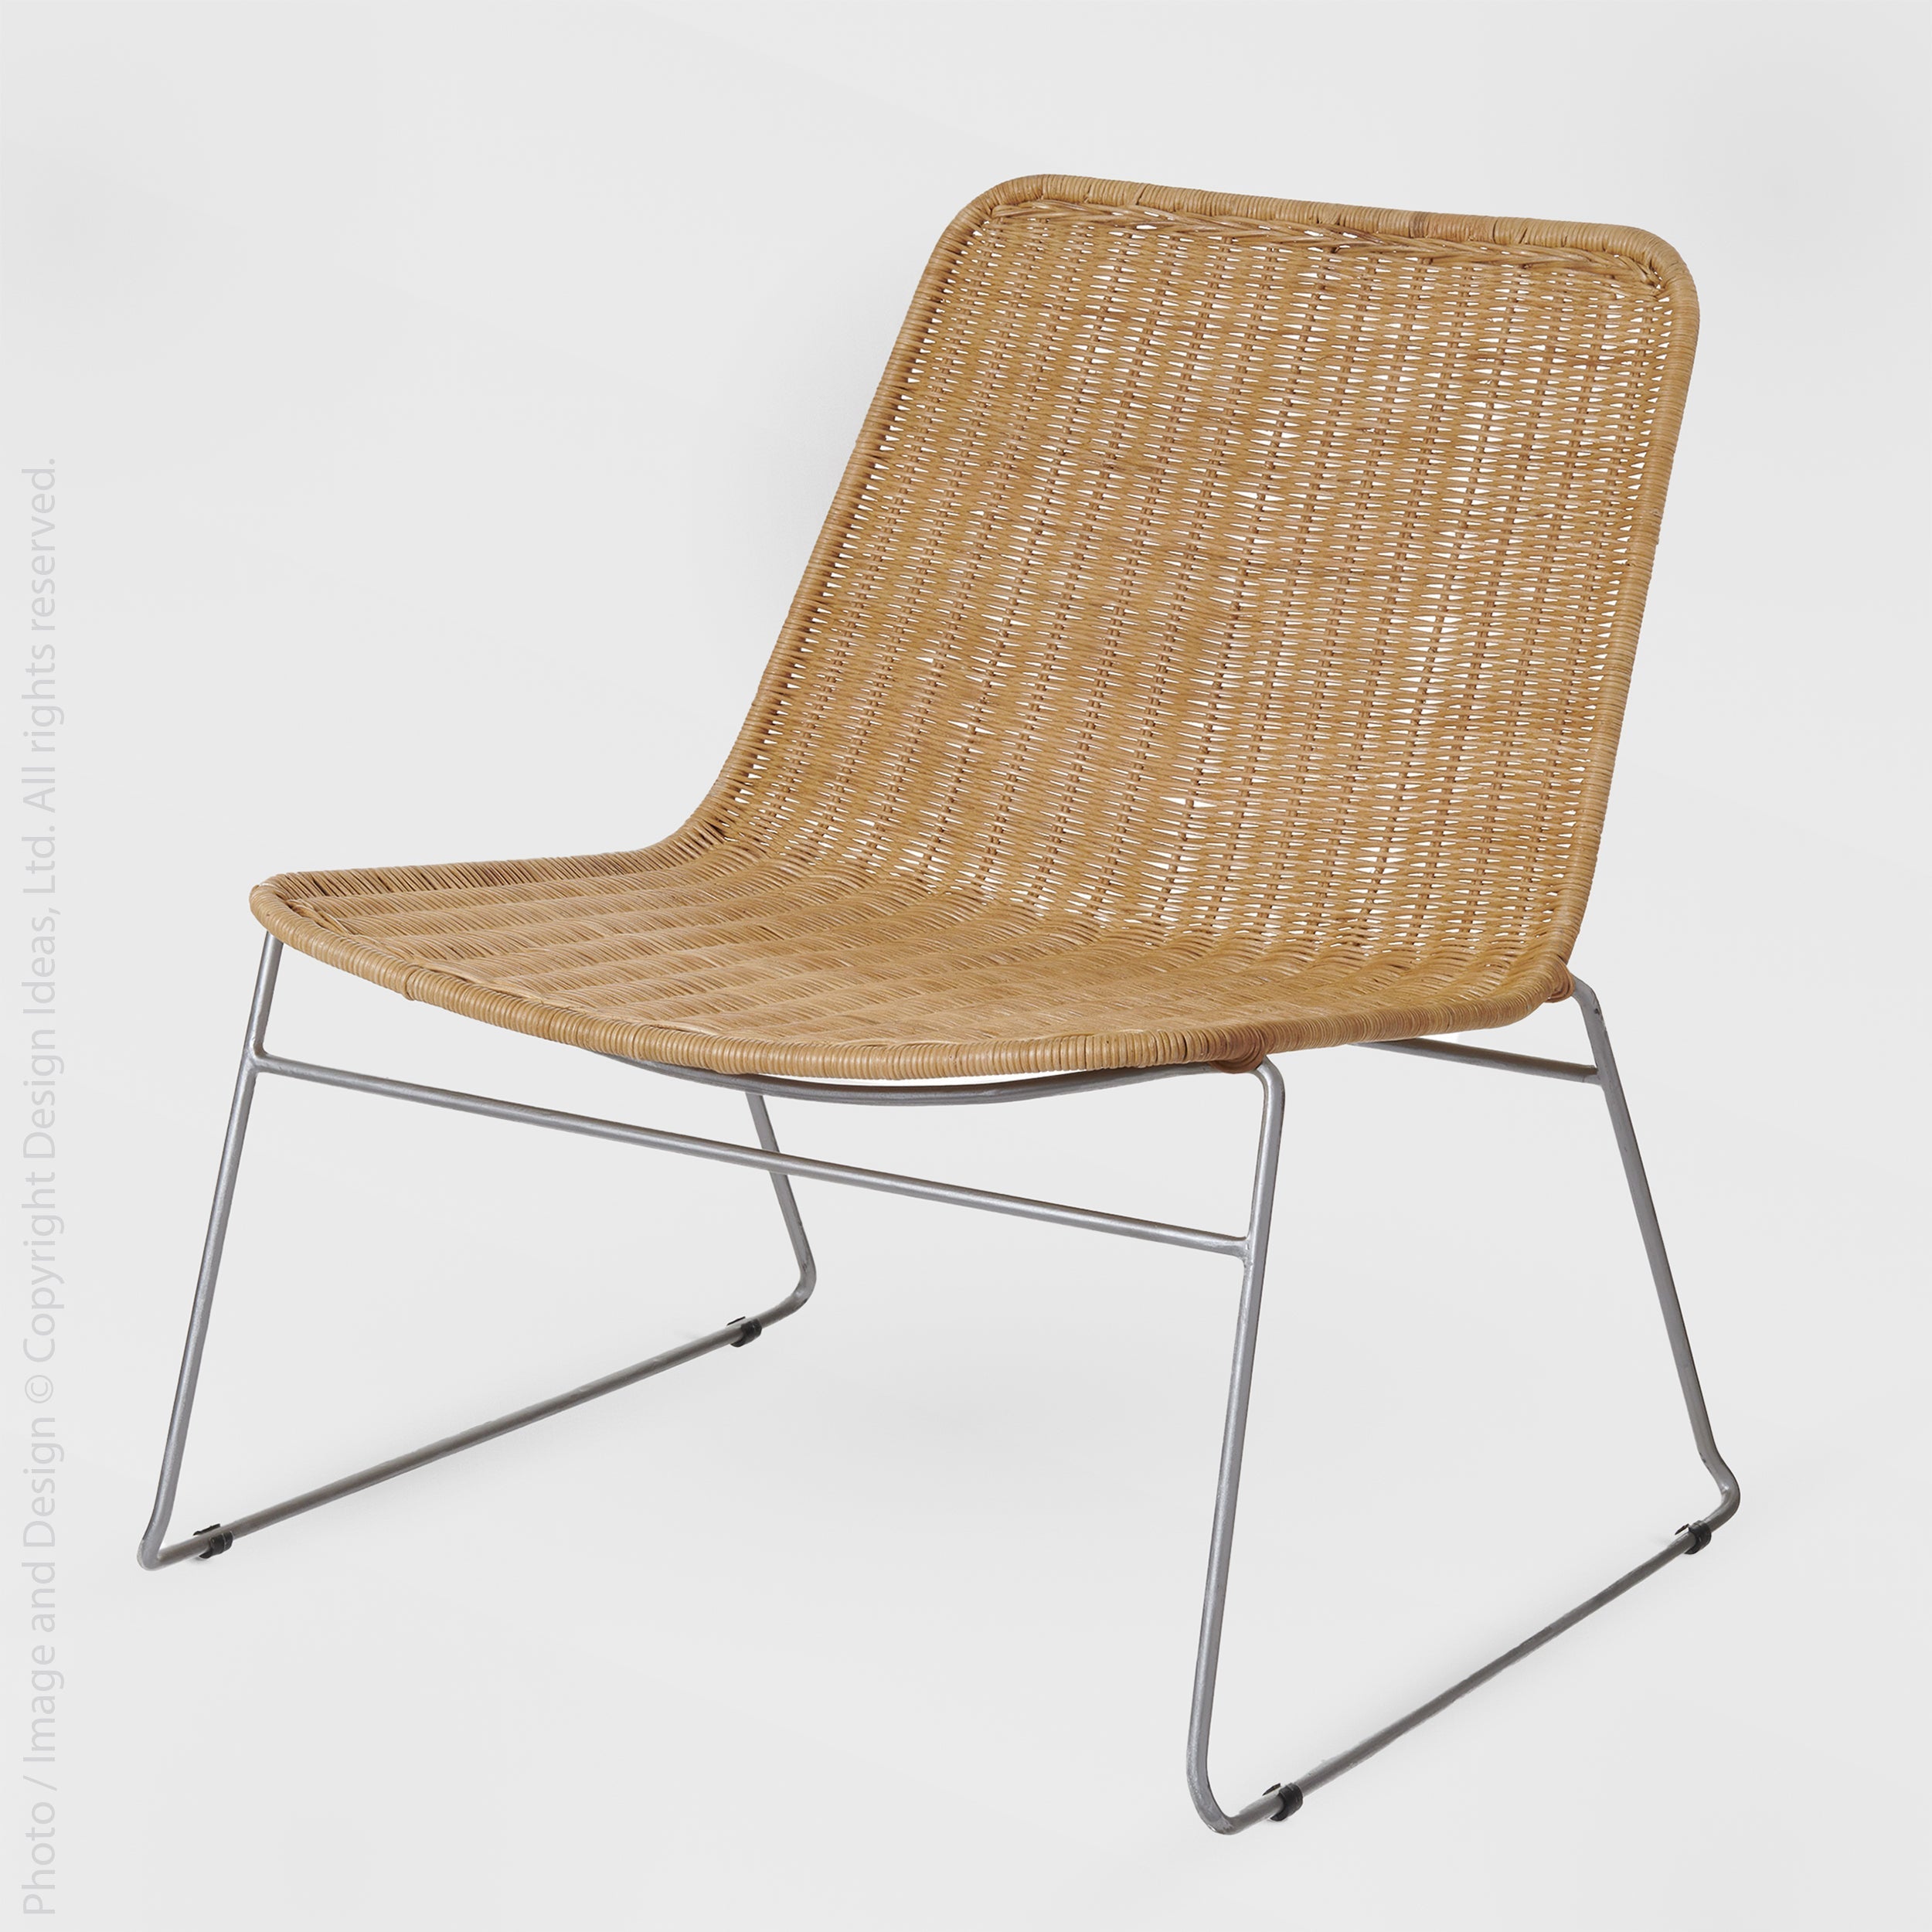 Larsen Rattan Lounge Chair   | Image 7 | From the Larsen Collection | Exquisitely assembled with natural rattan for long lasting use | Available in golden and natural colors | texxture home